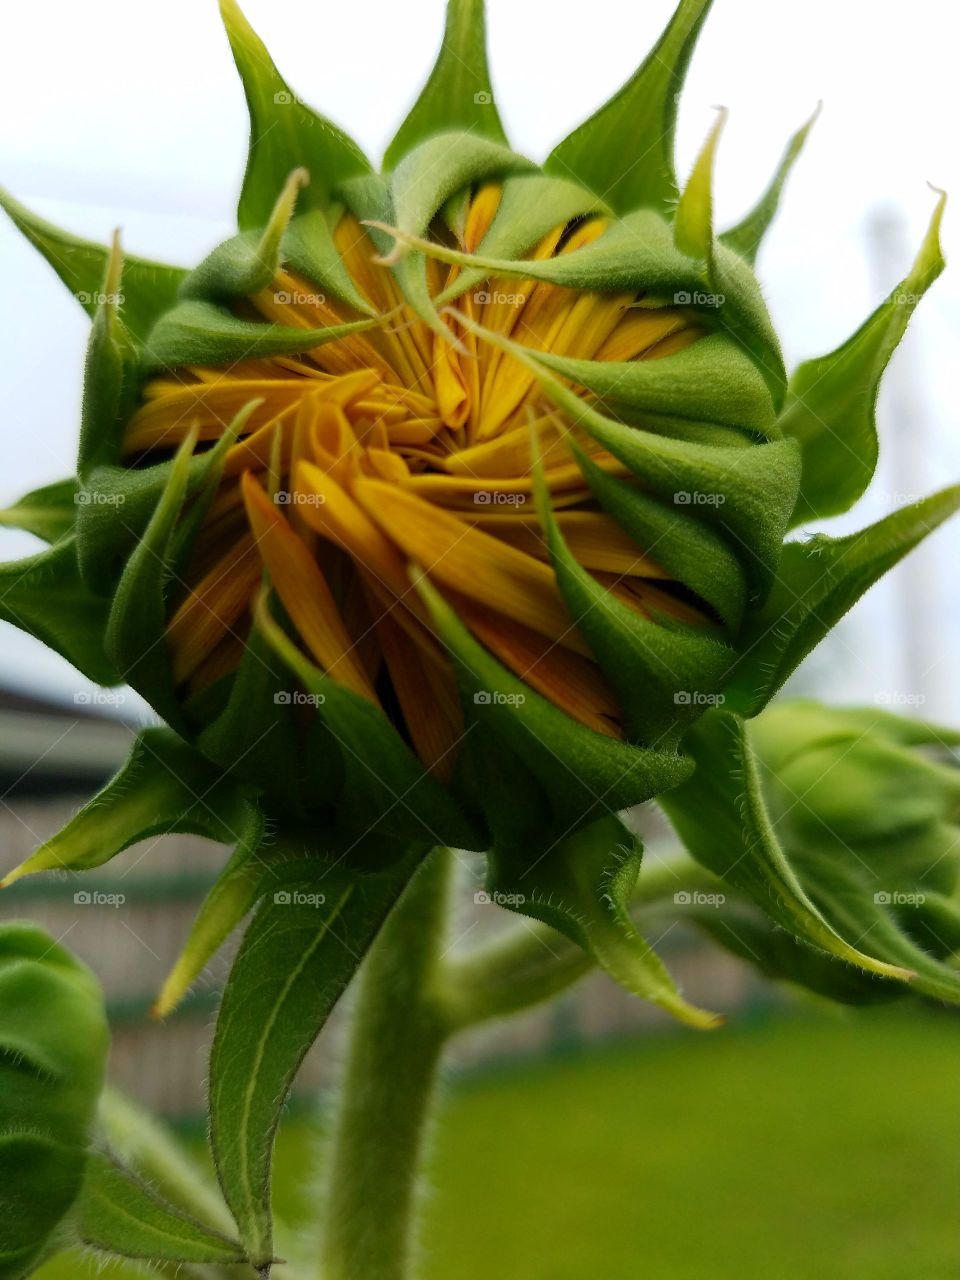 My garden sprouted this sunflower with one seed,Big Island,Hawai'i.  Live,Life,Love❤